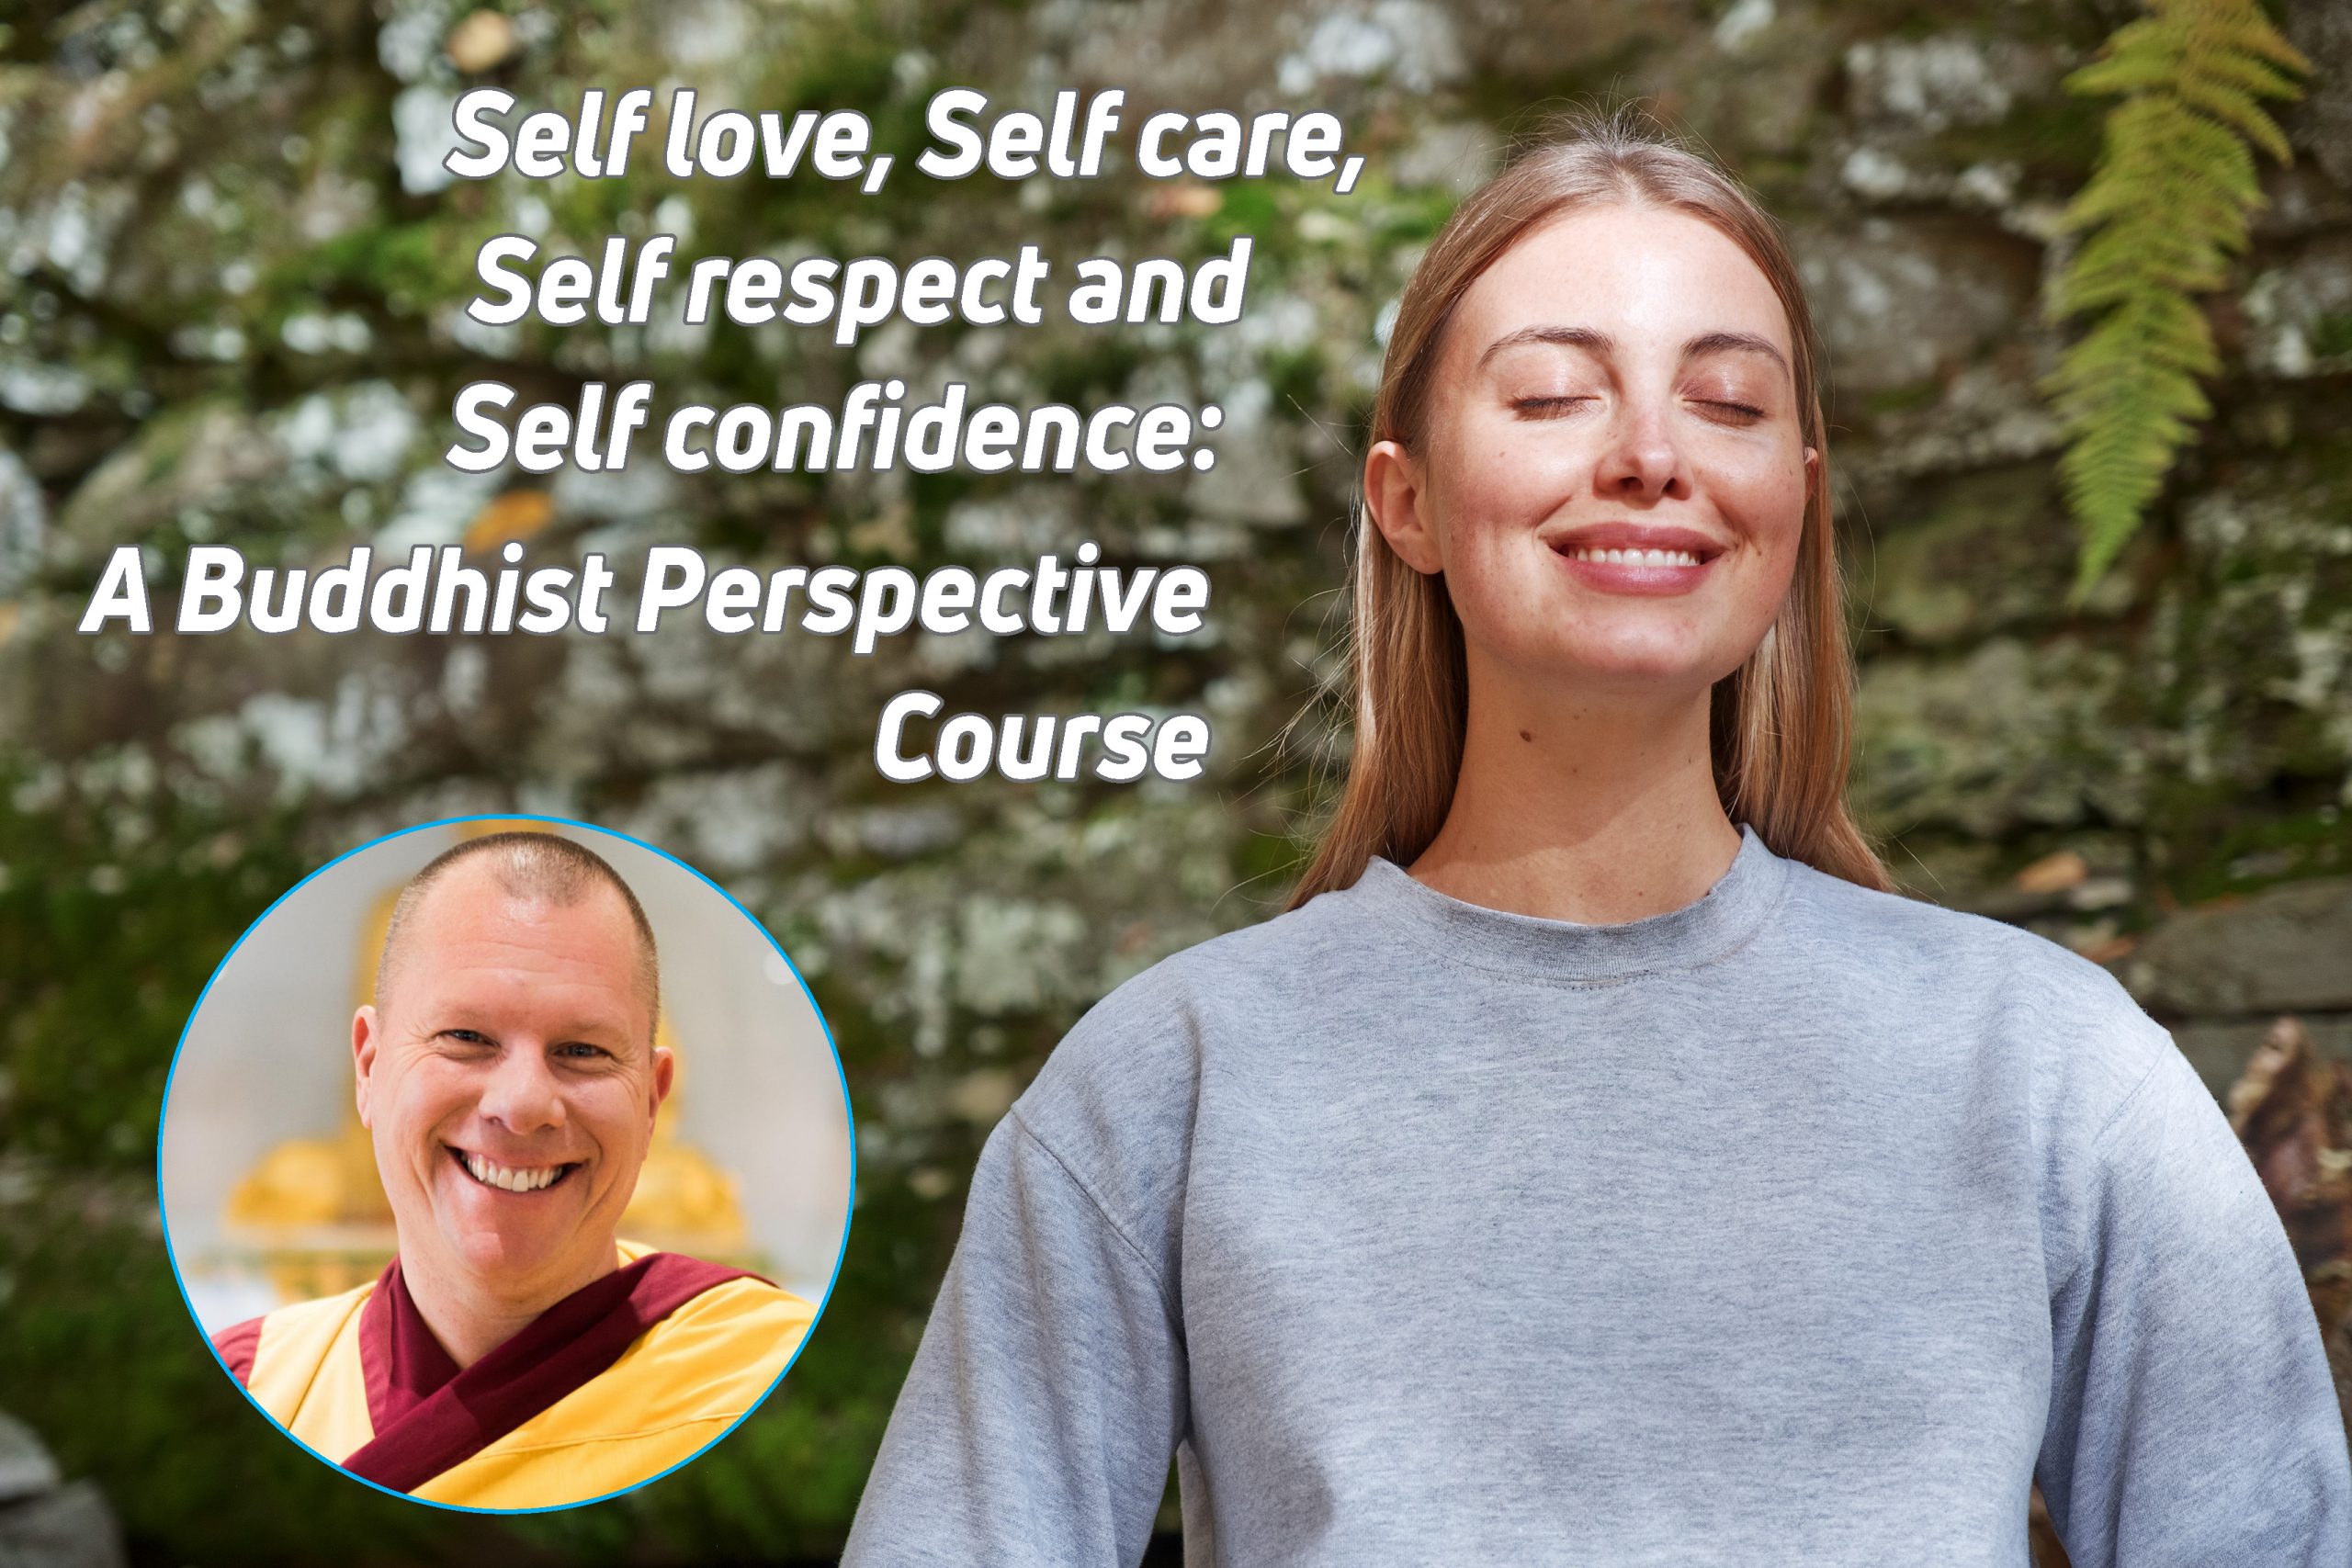 Beautiful young woman in nature - looking happy & serene, with course title & picture of Teacher Gen Kelsang Thekchen